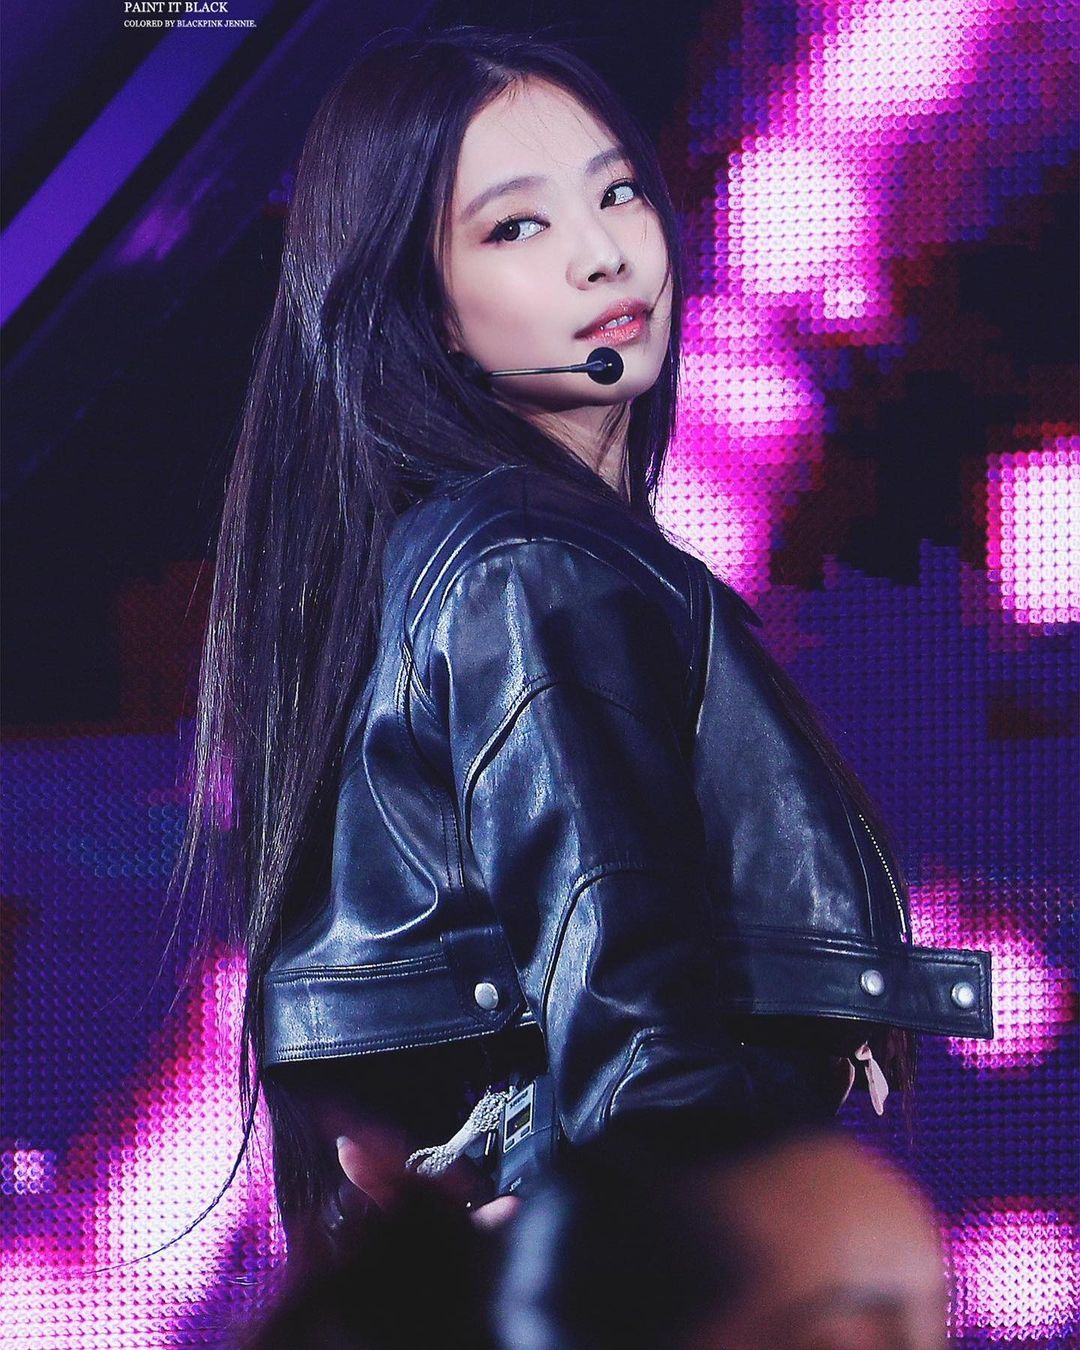 JENNIE, unrivaled aura... 'You & Me' performance video also released